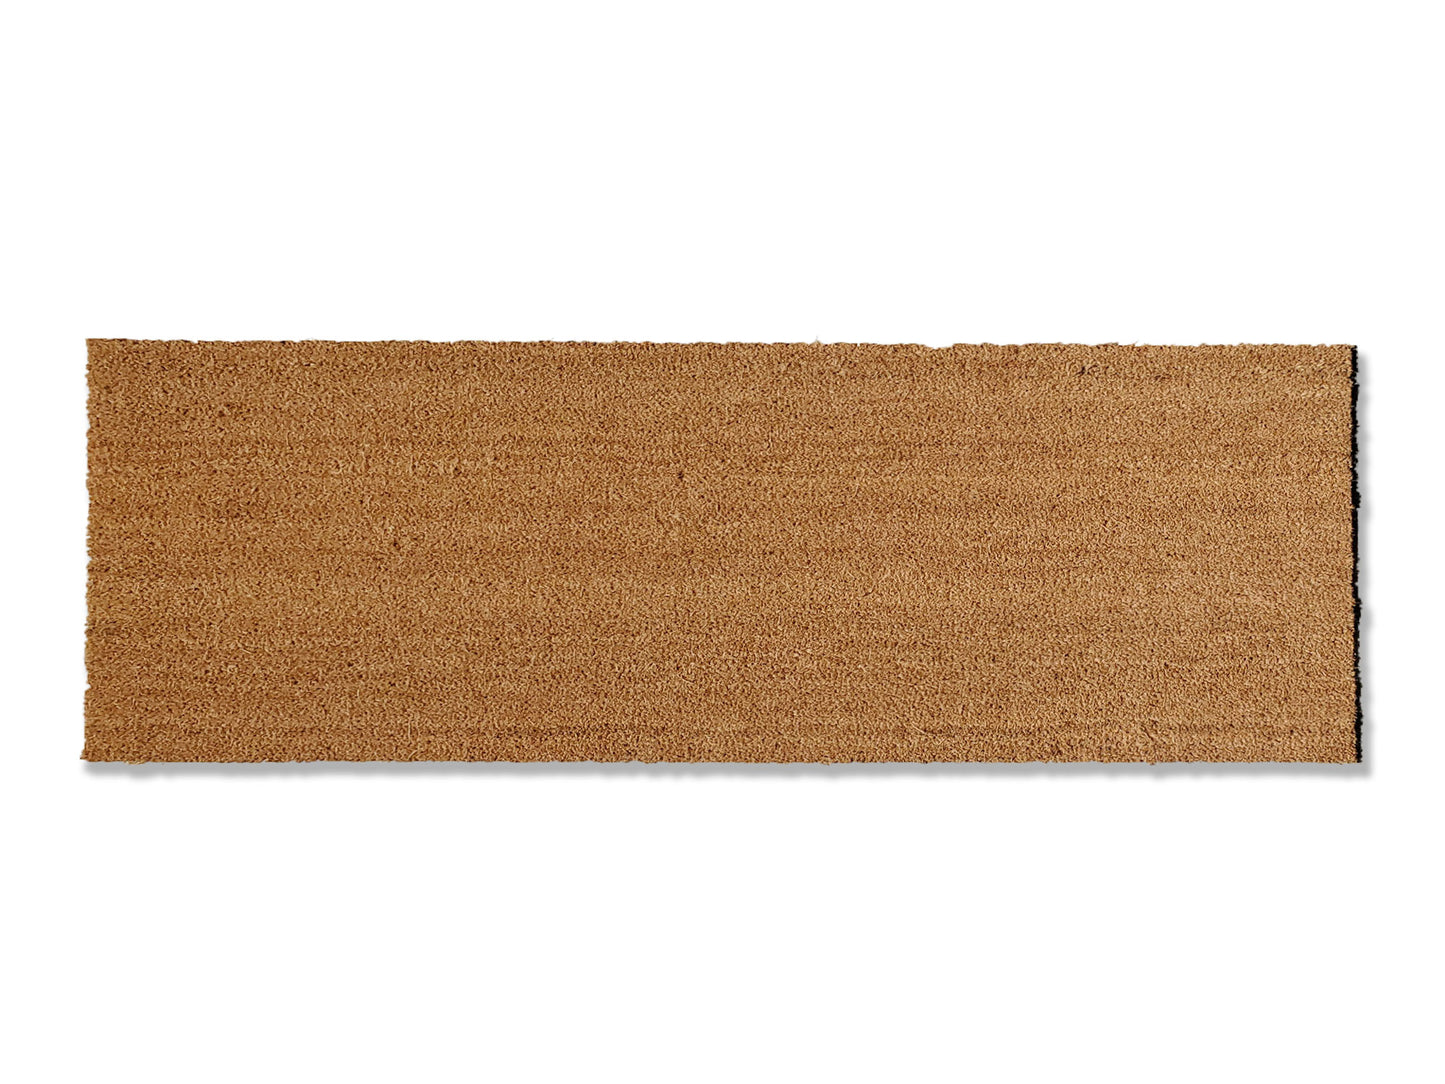 Plain Coir Doormat - Available in multiple sizes, this doormat is highly effective at trapping dirt. A versatile and practical addition to your entryway.